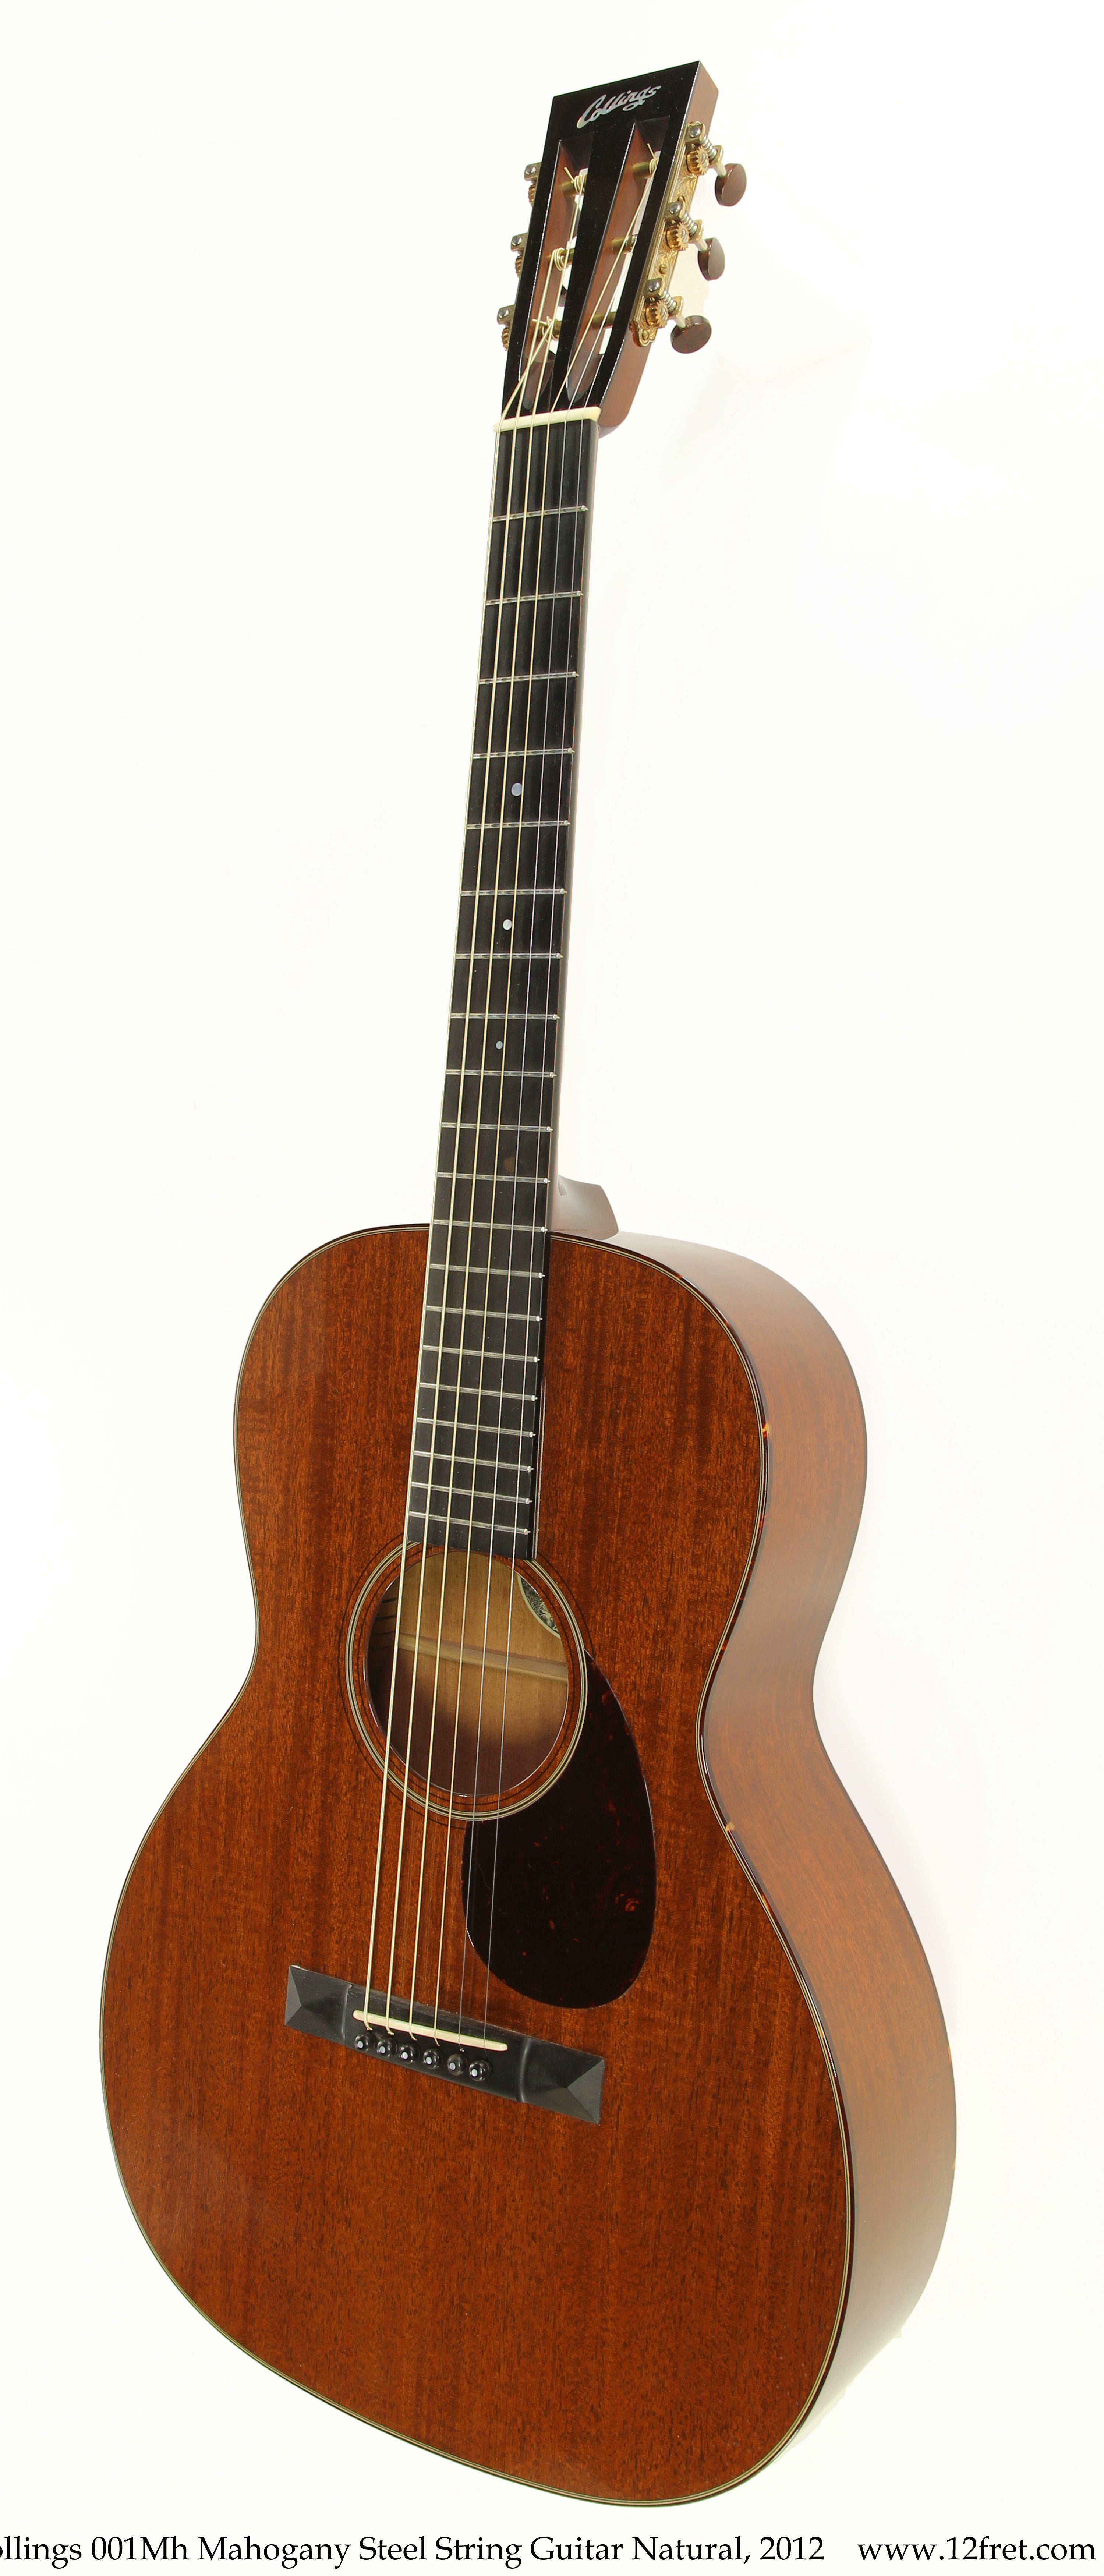 Collings 001Mh Mahogany Steel String Guitar Natural, 2012  - The Twelfth Fret